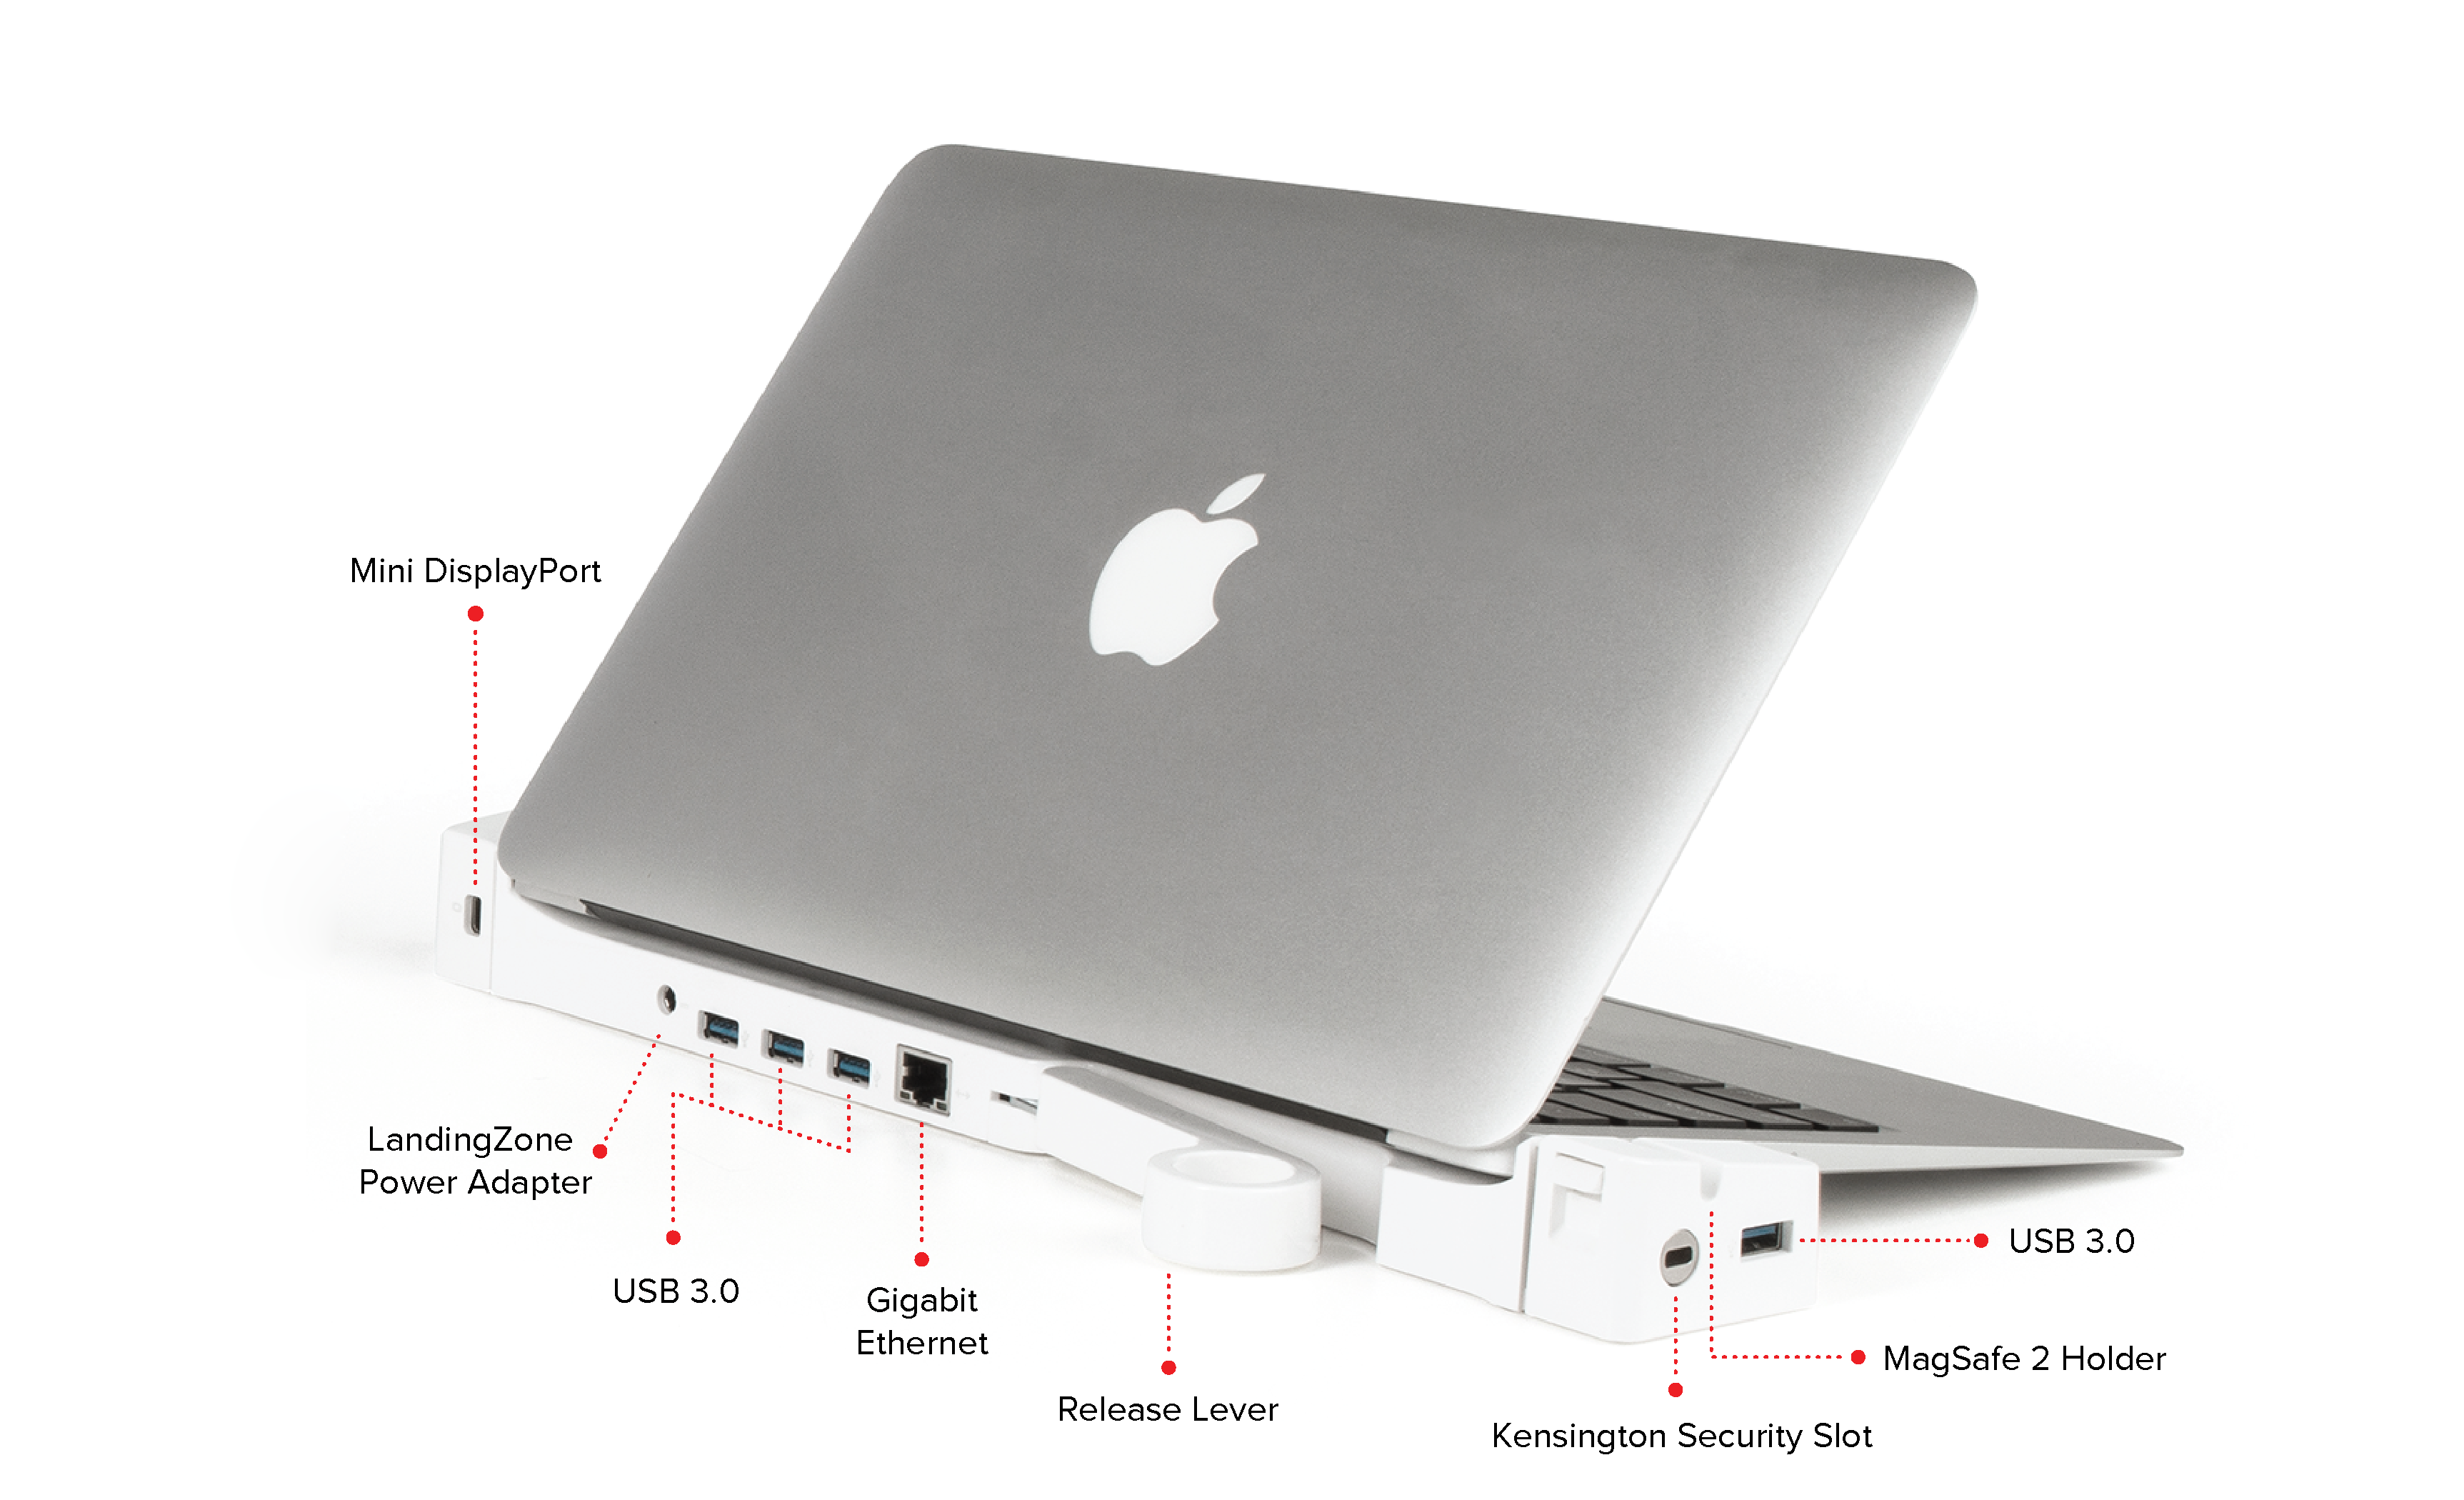 FOR THE 13-INCH MACBOOK AIR (RELEASED 2012 TO 2017) - LandingZone